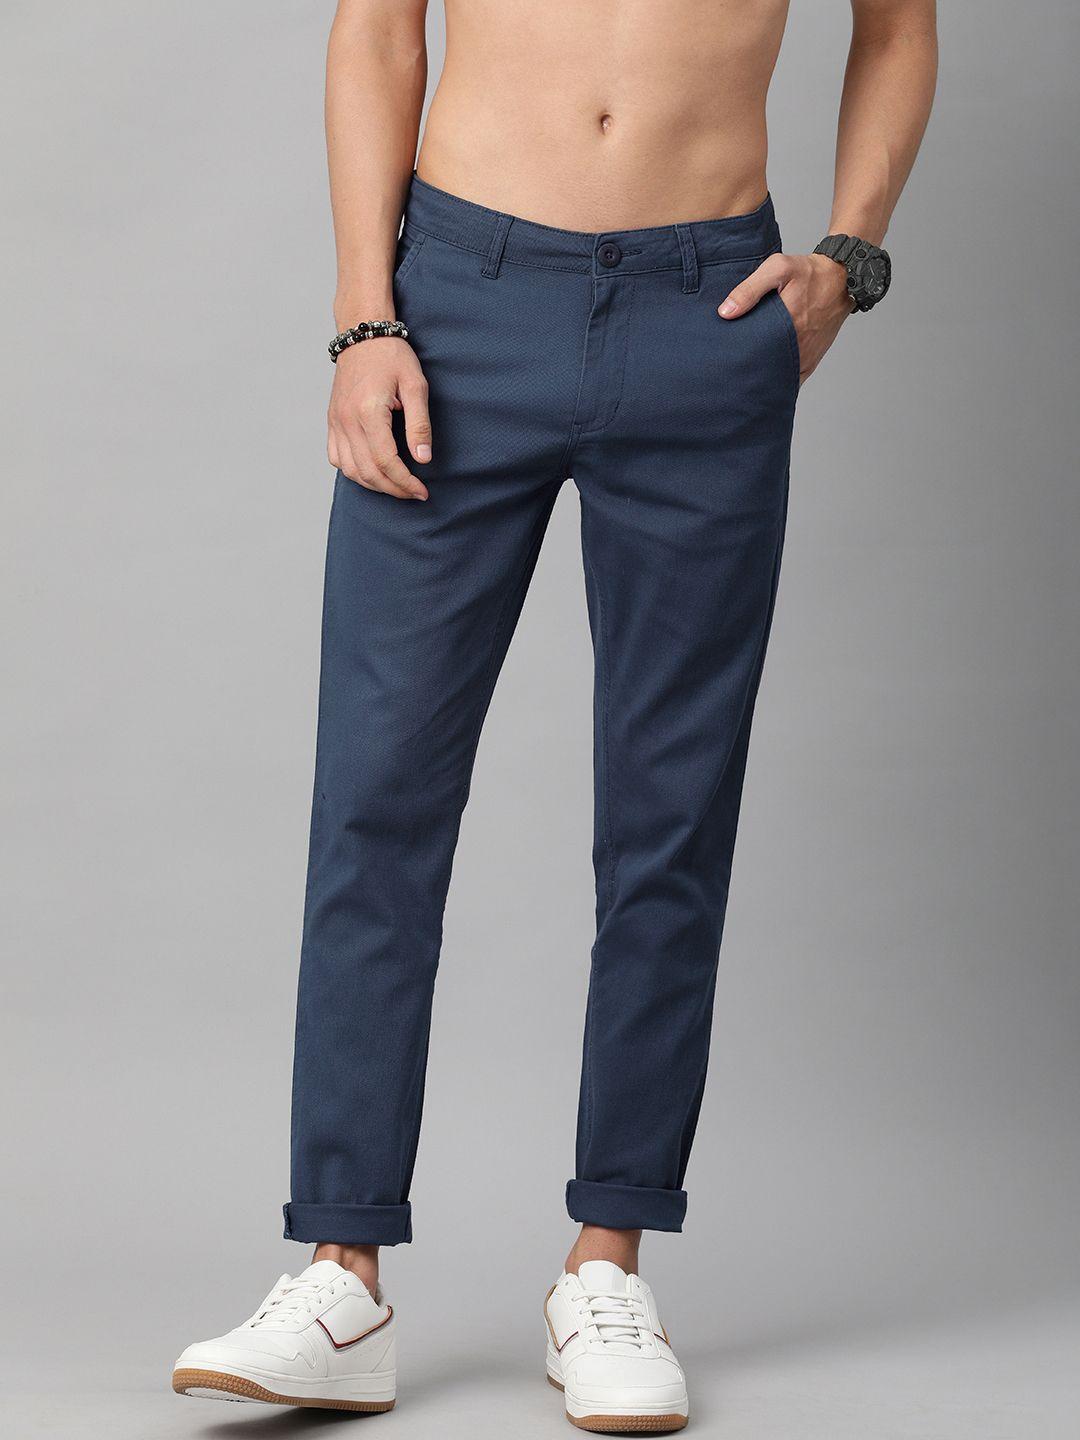 roadster men teal blue chinos trousers